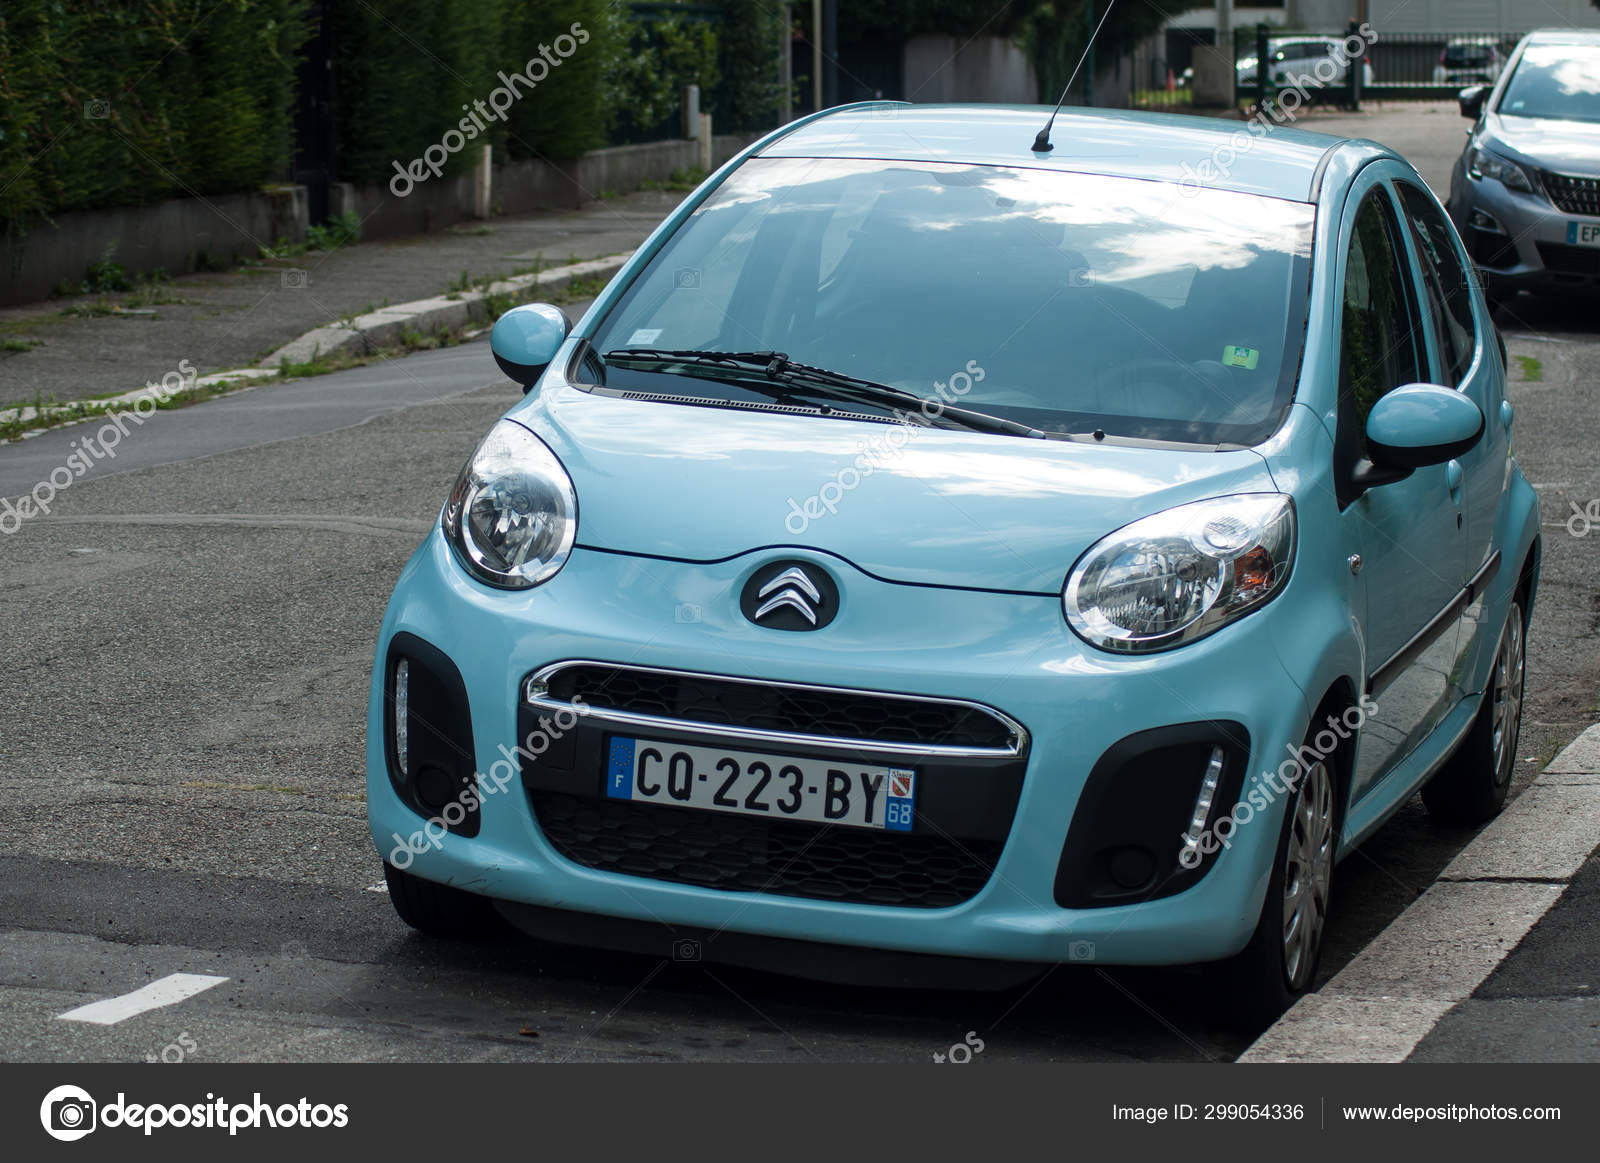 Front View Of Blue Citroen C1 Parked In The Street – Stock Editorial Photo © Neydtstock #299054336